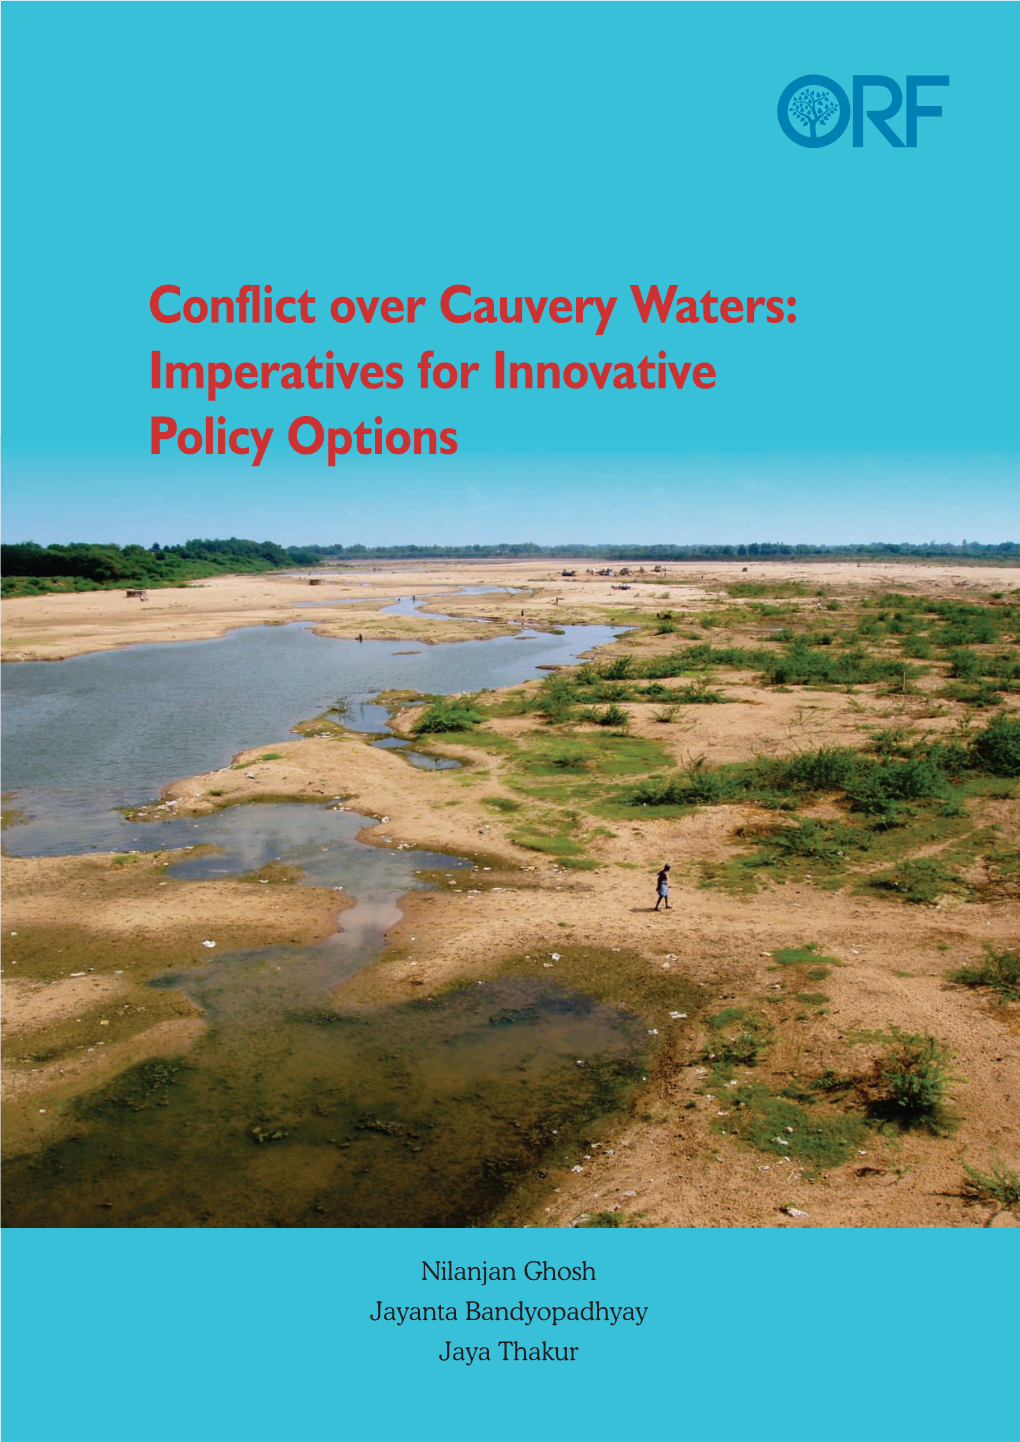 Conflict Over Cauvery Waters: Imperatives for Innovative Policy Options